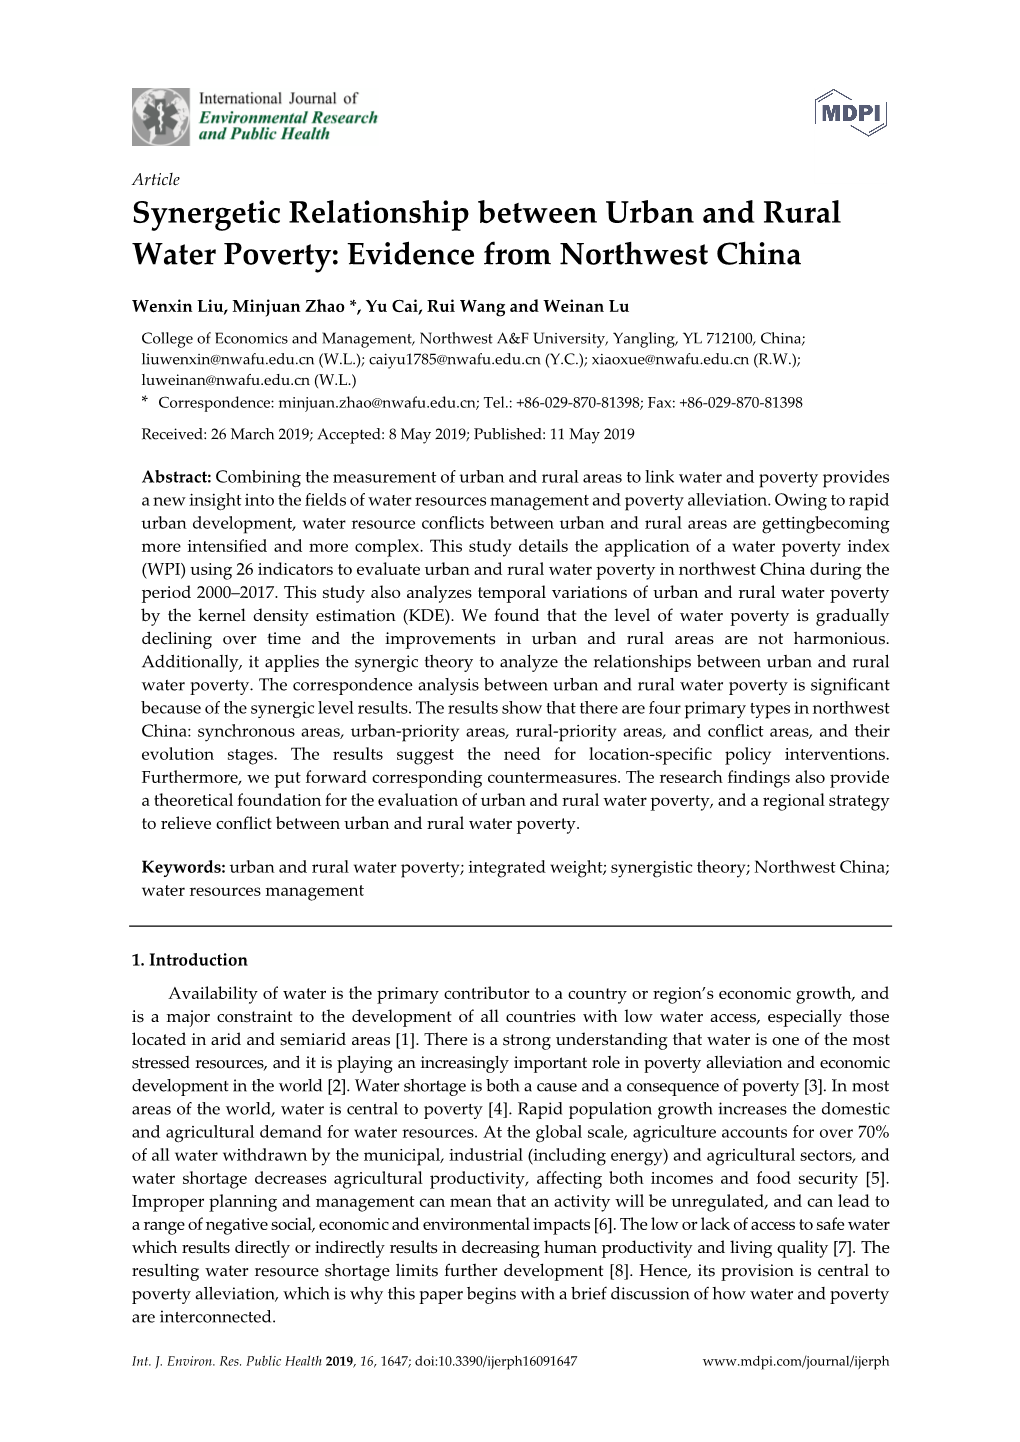 Synergetic Relationship Between Urban and Rural Water Poverty: Evidence from Northwest China